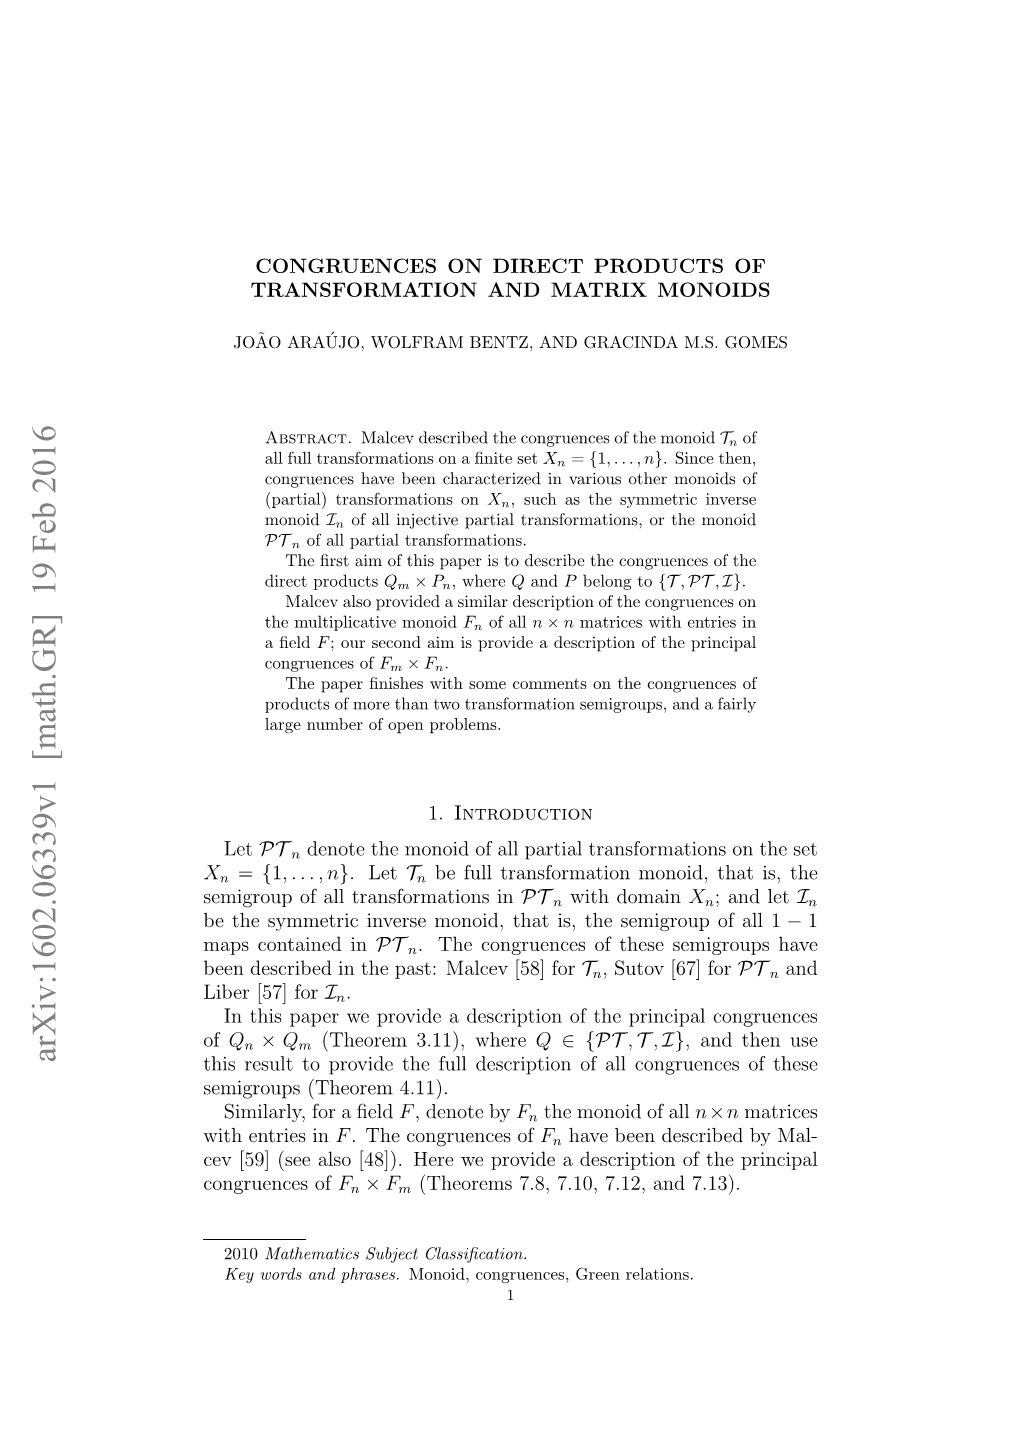 Congruences on Direct Products of Transformation and Matrix Monoids